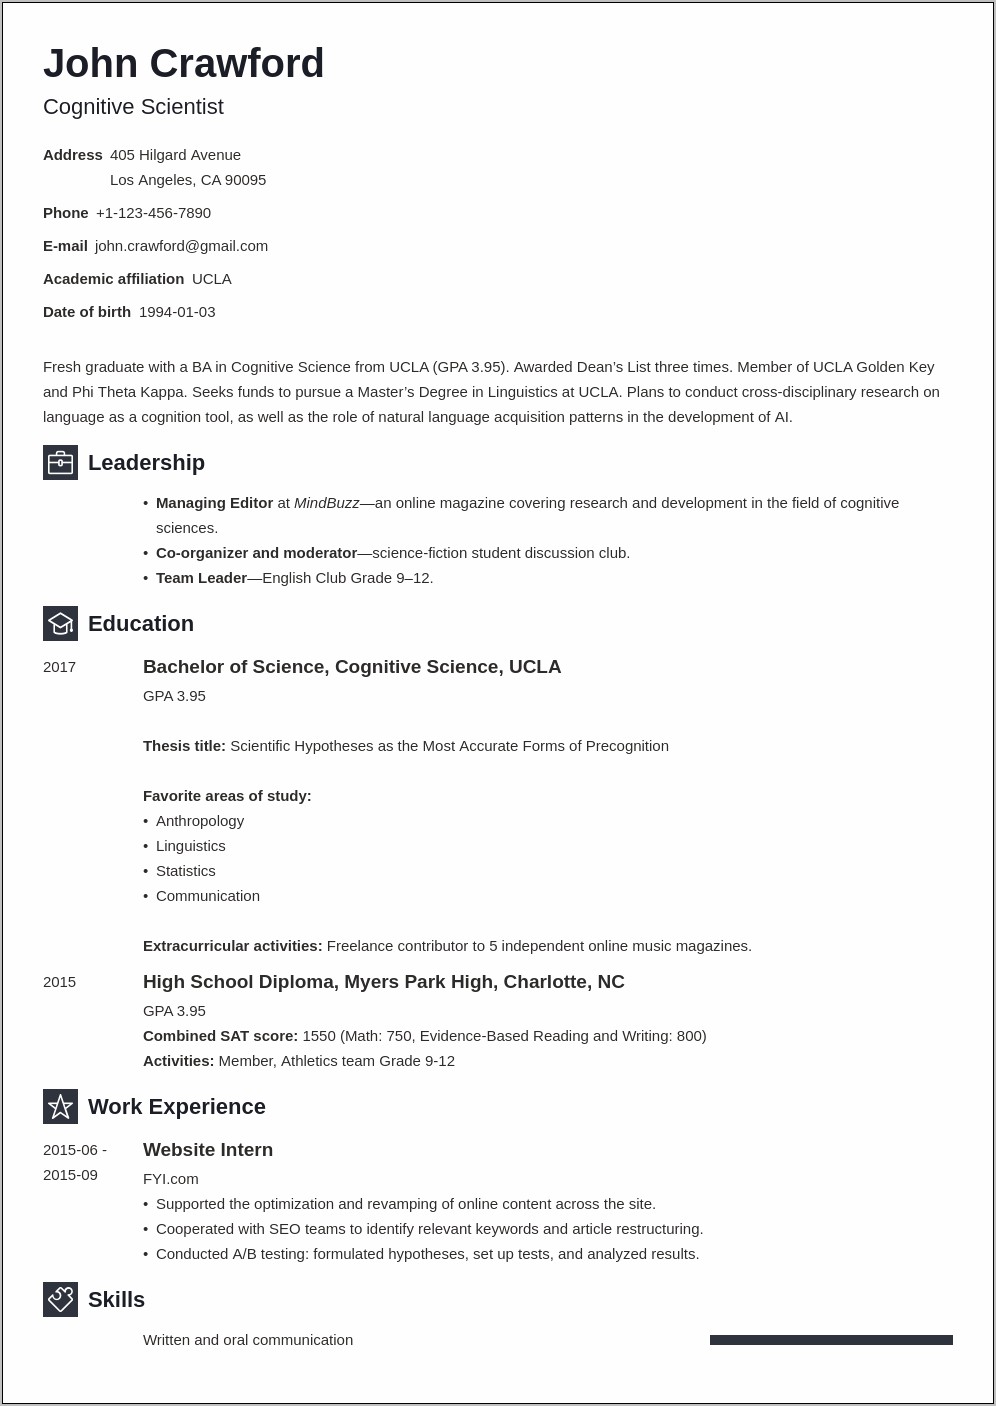 Objective Section Of A Resume Examples